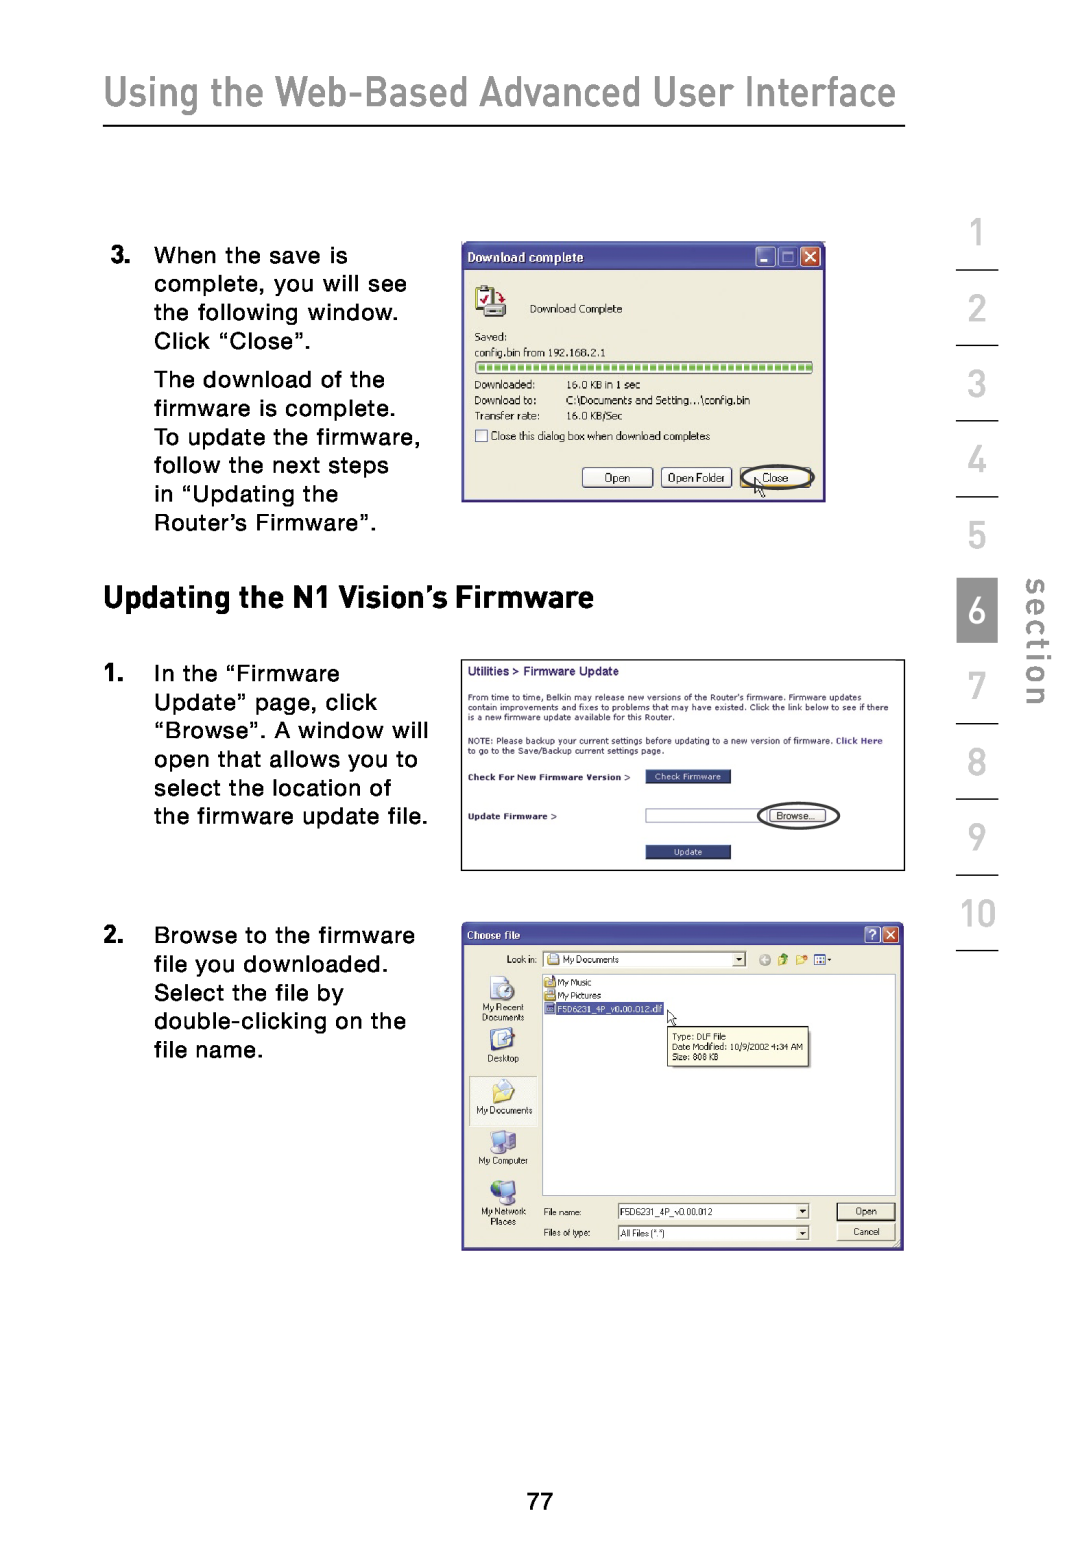 Belkin user manual Updating the N1 Vision’s Firmware, Using the Web-Based Advanced User Interface, section 